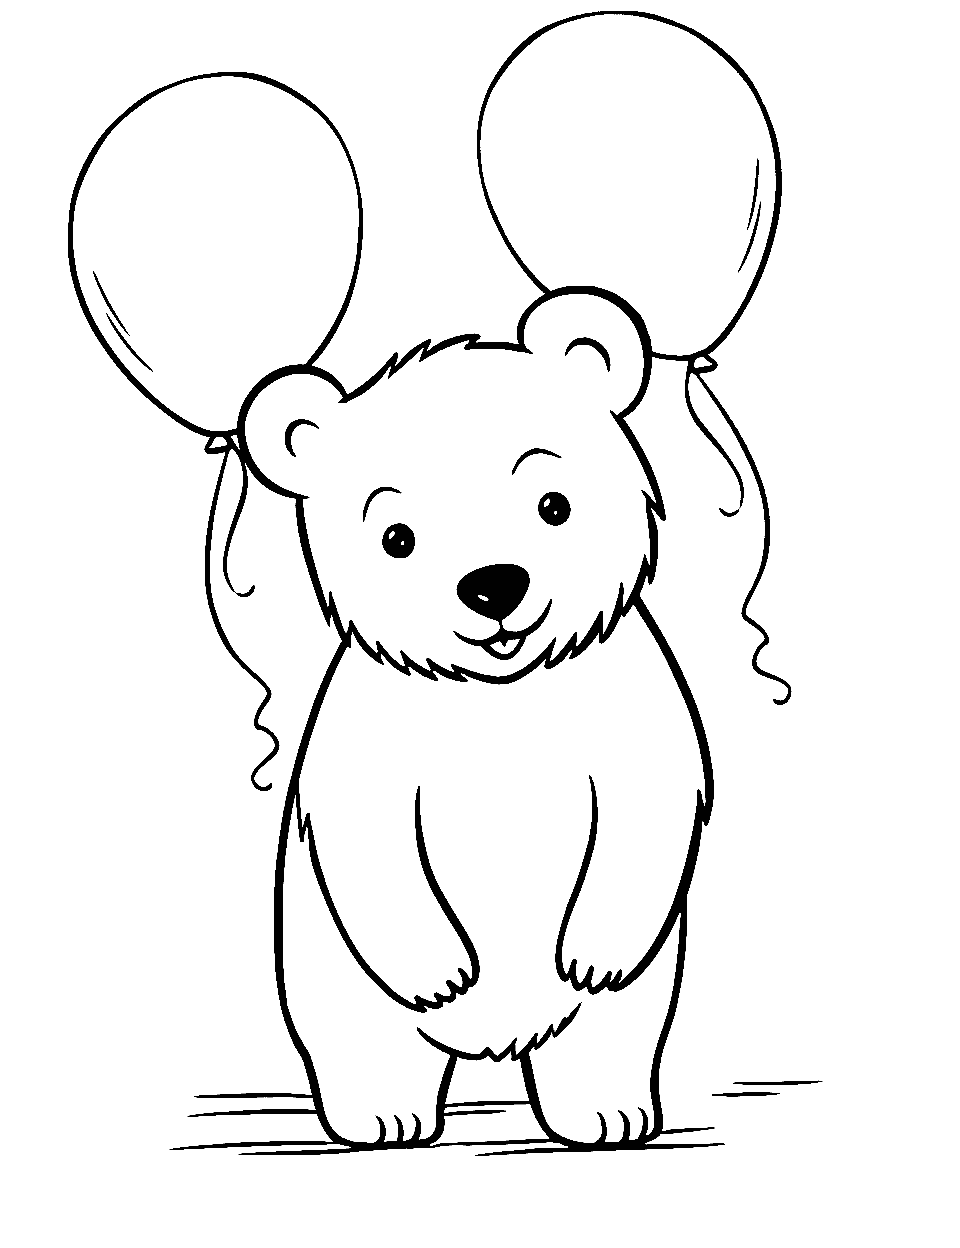 Kid Bear with Balloon Coloring Page - A young bear playing with colorful balloons.